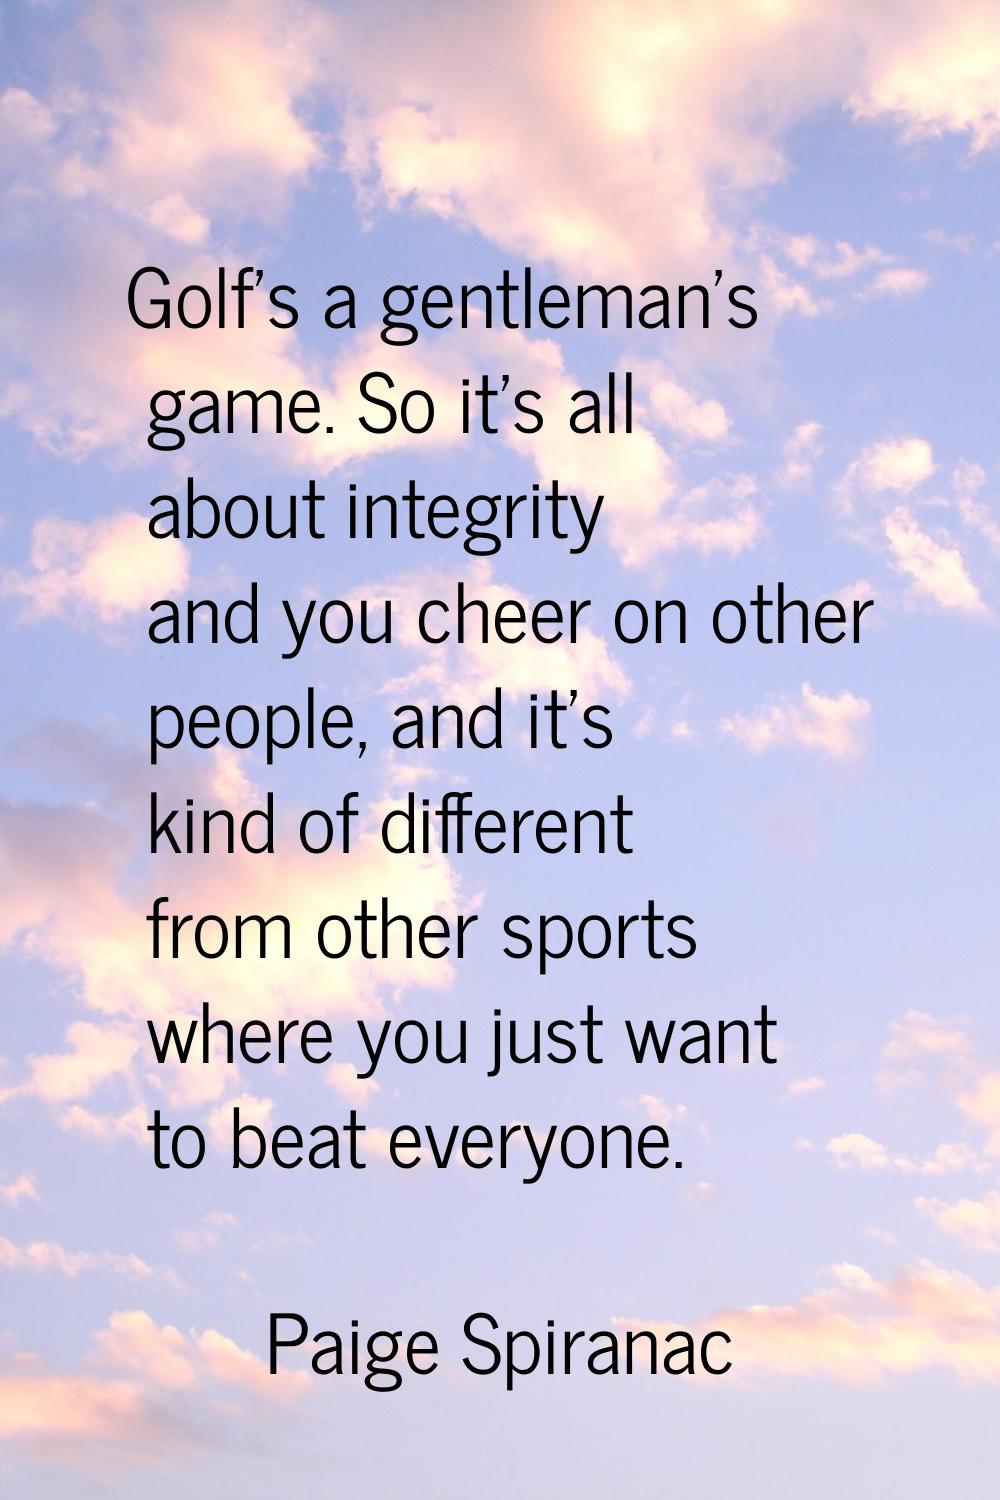 Golf's a gentleman's game. So it's all about integrity and you cheer on other people, and it's kind